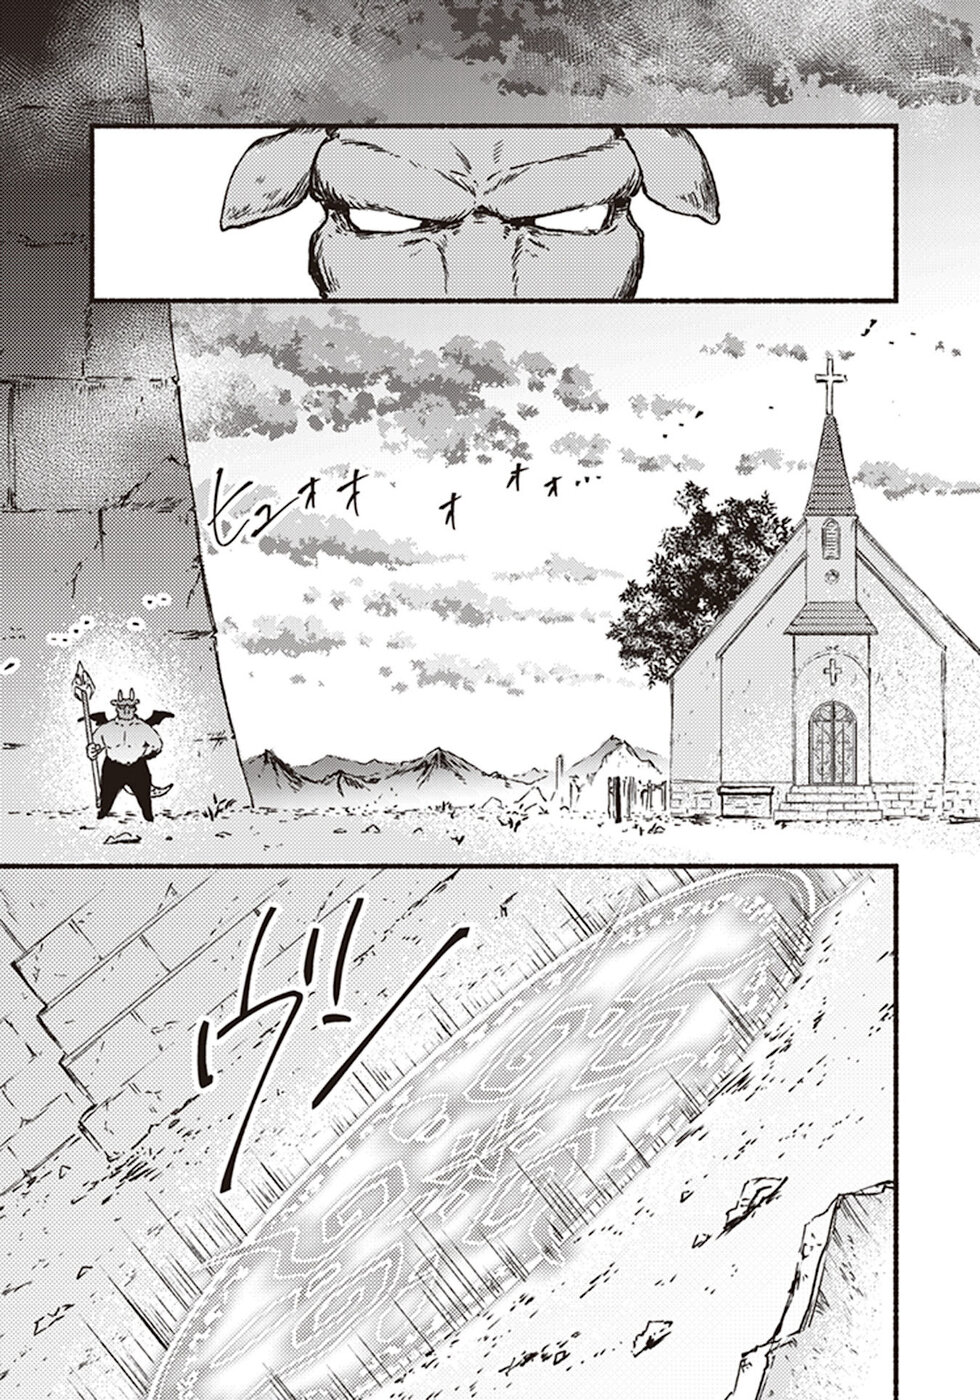 This Last Boss, the Church in Front of the Devil's Castle Vol. 1 Ch. 4 Alcohol! I Can't Do Without Drinking!